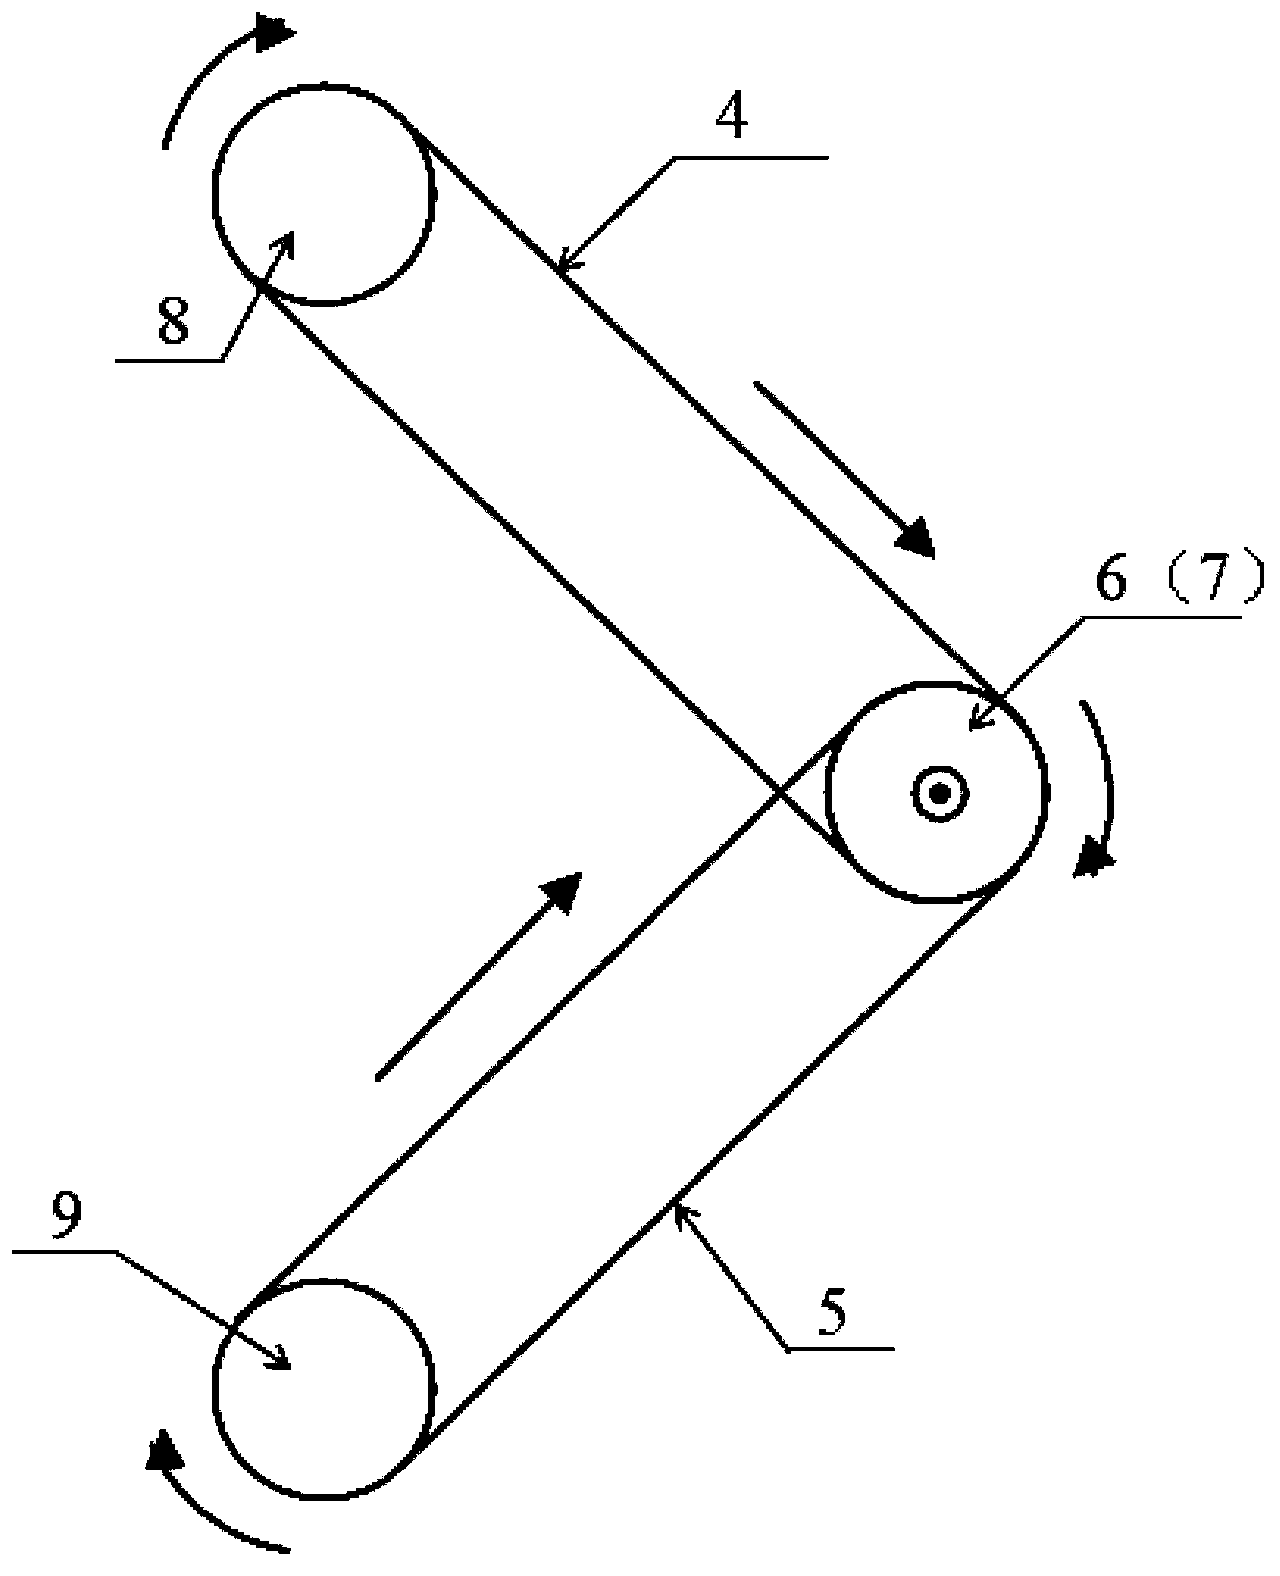 Escalator based on a potential energy transformation single drive mechanism